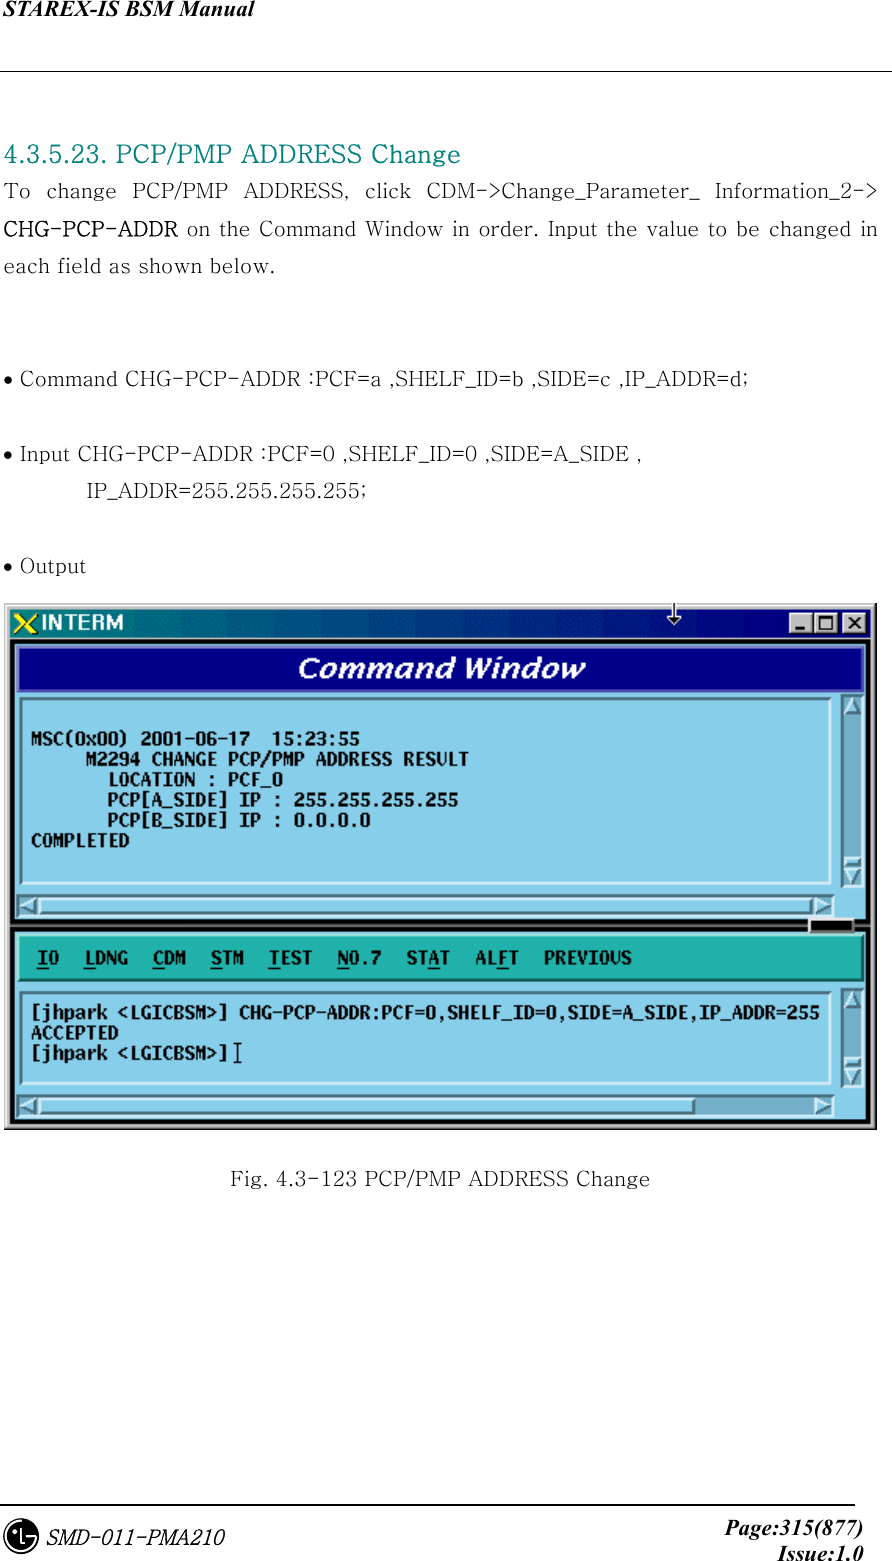 STAREX-IS BSM Manual     Page:315(877)Issue:1.0SMD-011-PMA210  4.3.5.23. PCP/PMP ADDRESS Change To  change  PCP/PMP  ADDRESS,  click  CDM-&gt;Change_Parameter_  Information_2-&gt; CHG-PCP-ADDR on the Command Window in order. Input the value to be changed in each field as shown below.   • Command CHG-PCP-ADDR :PCF=a ,SHELF_ID=b ,SIDE=c ,IP_ADDR=d;  • Input CHG-PCP-ADDR :PCF=0 ,SHELF_ID=0 ,SIDE=A_SIDE , IP_ADDR=255.255.255.255;  • Output  Fig. 4.3-123 PCP/PMP ADDRESS Change 